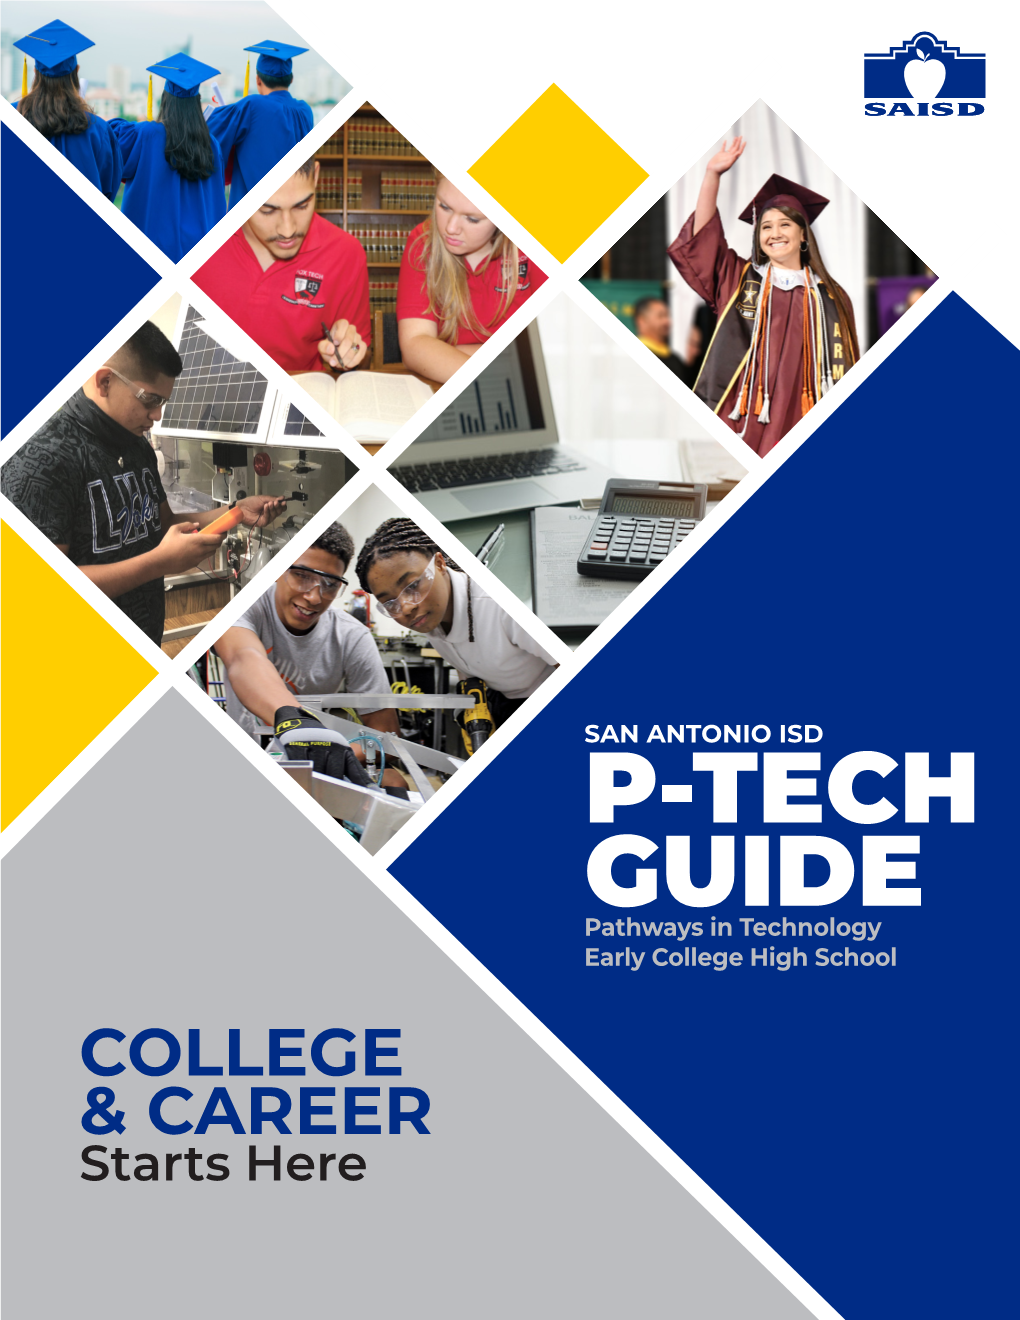 P-TECH GUIDE Pathways in Technology Early College High School COLLEGE & CAREER Starts Here